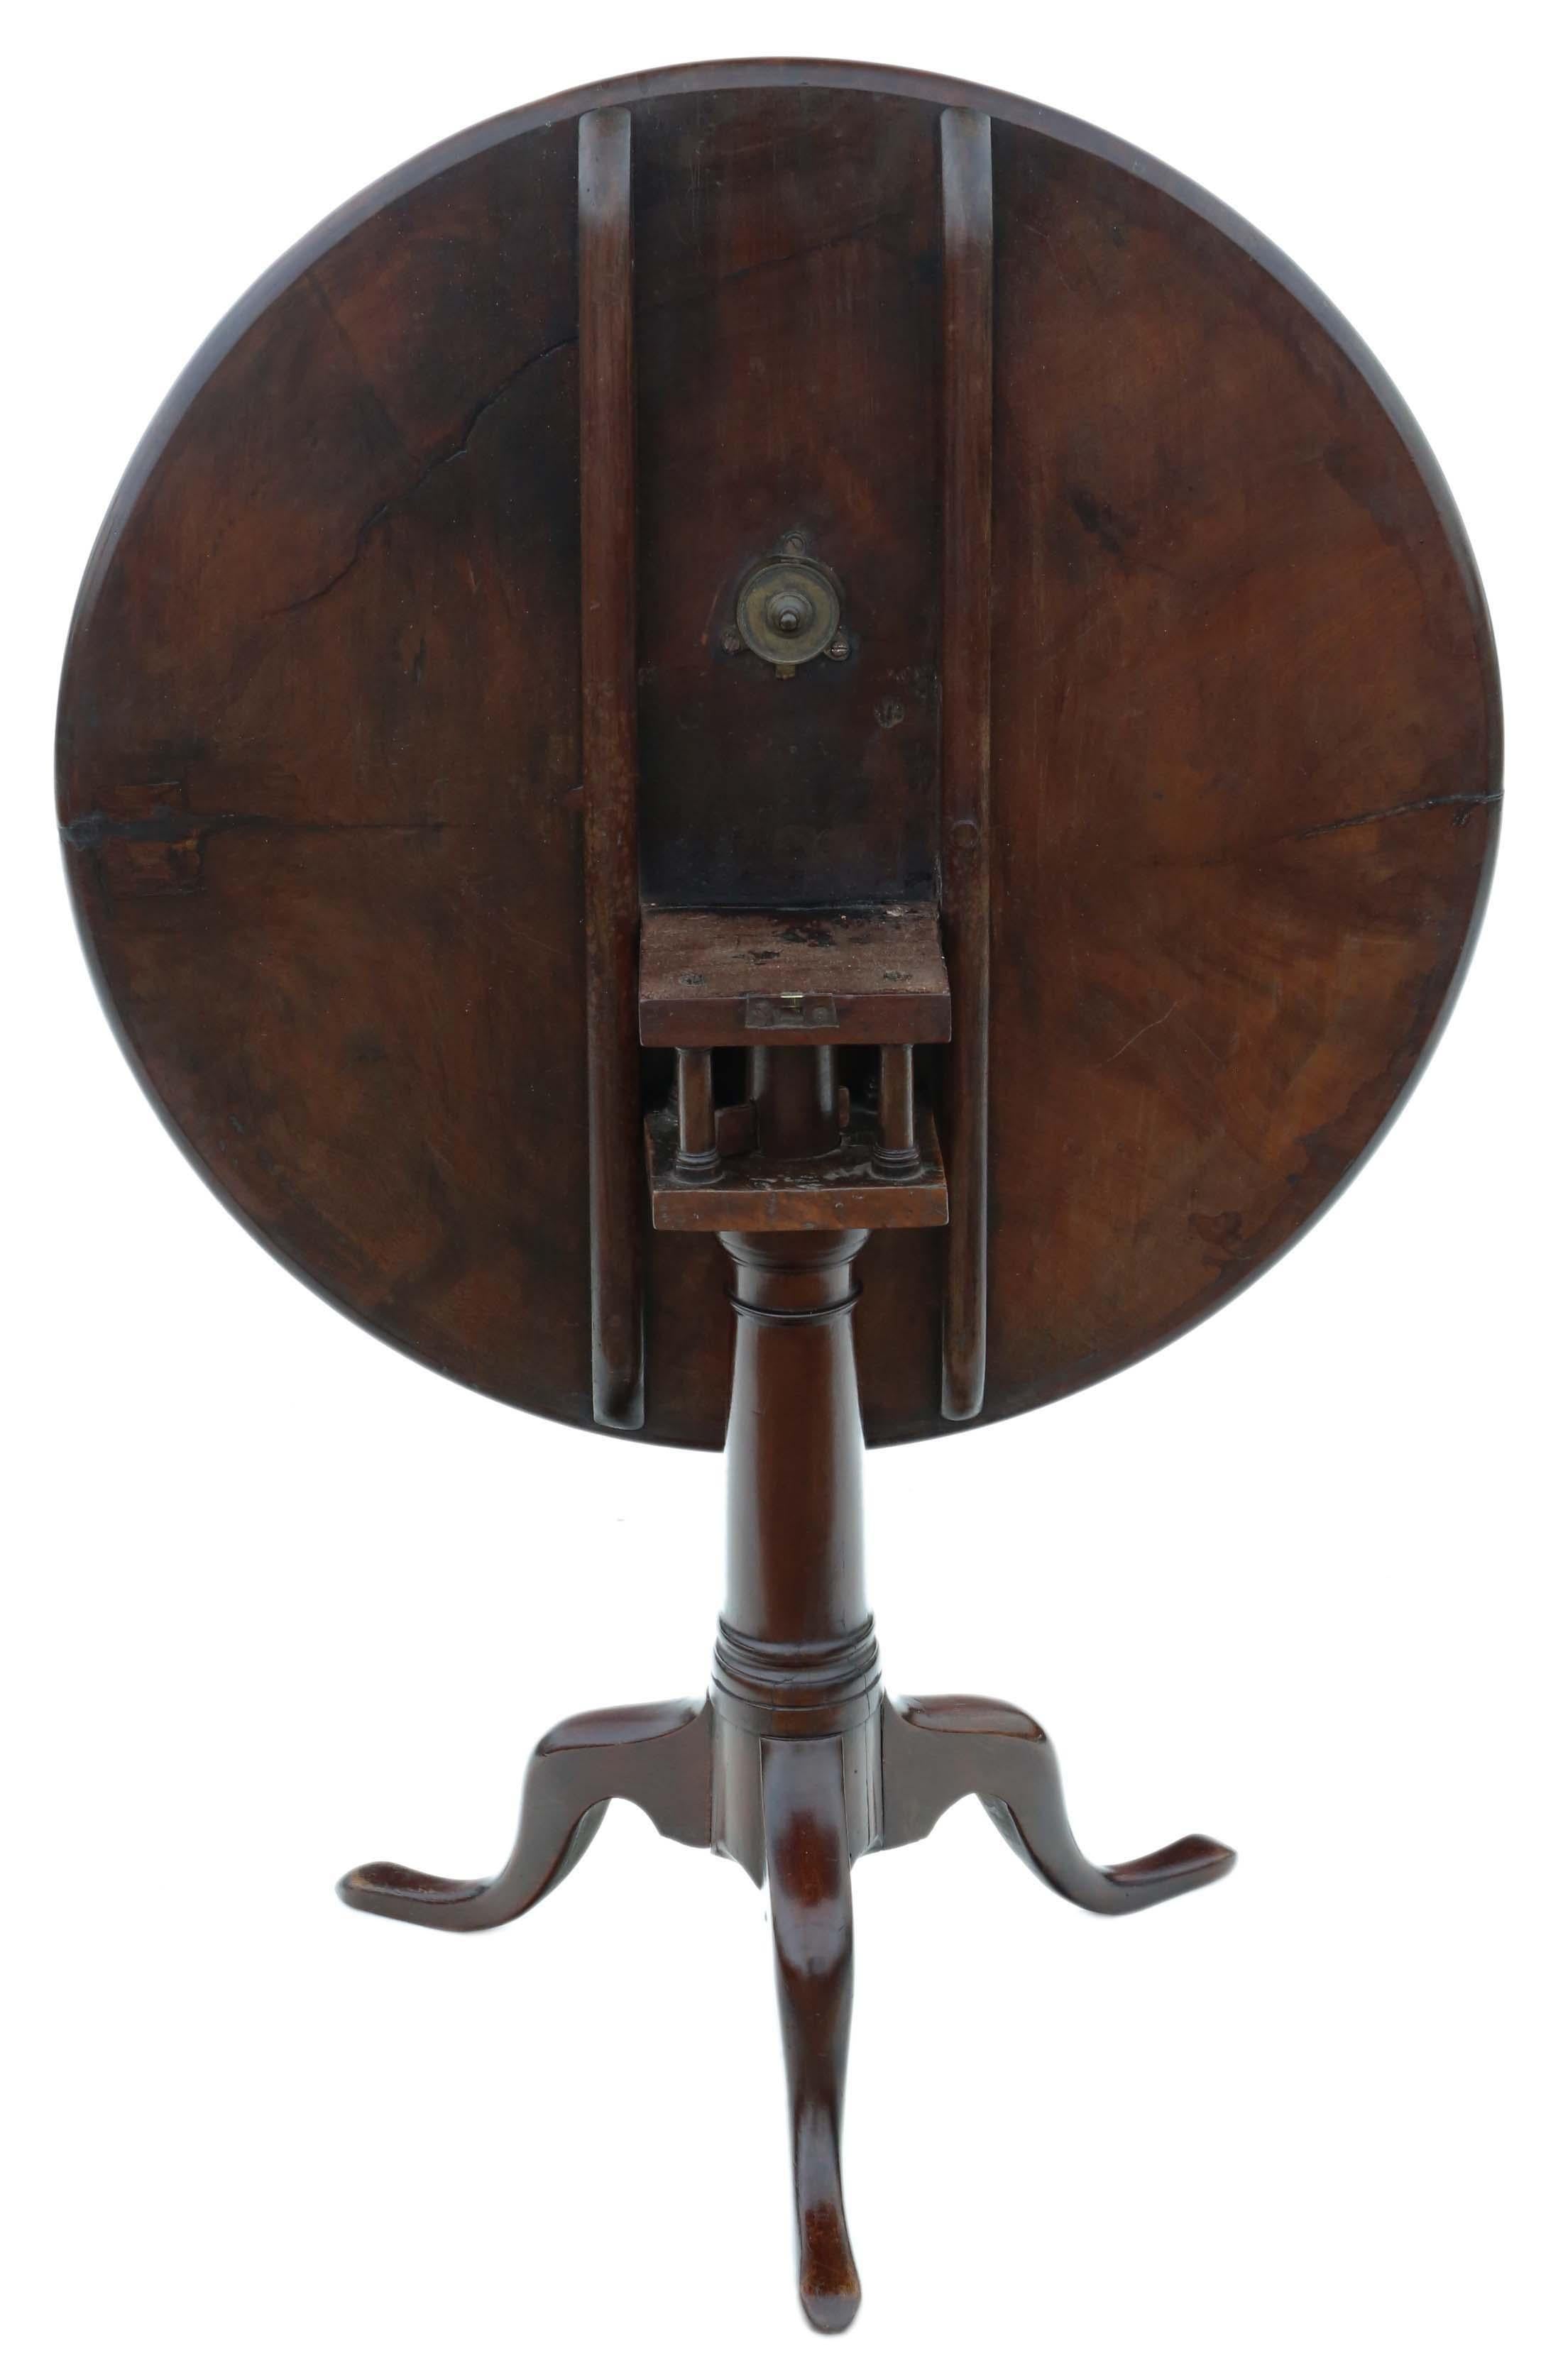 18th Century Georgian Mahogany Tilt-Top Birdcage Supper Table for Side Wine In Good Condition For Sale In Wisbech, Cambridgeshire